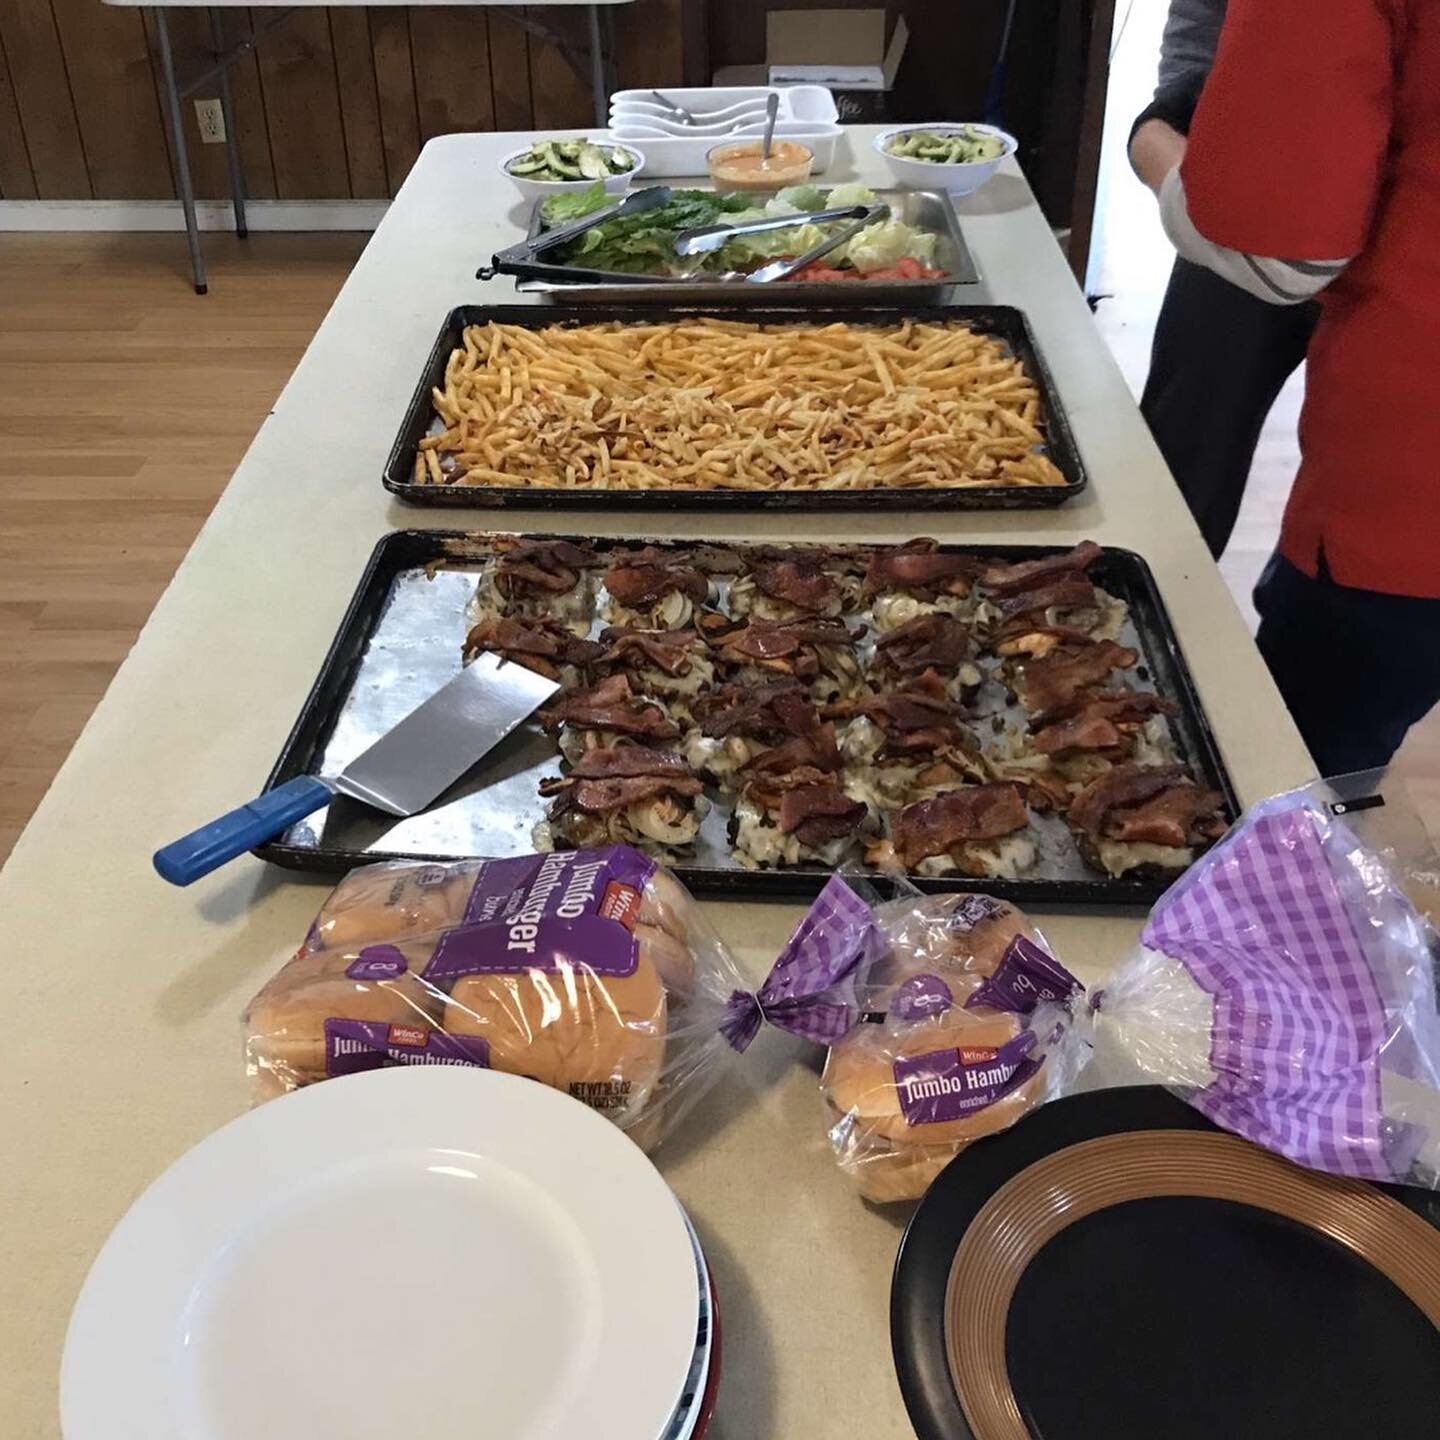 Here at the Lodge, every day is a feast! Big shout out to our Chef Cathy who never disappoints!